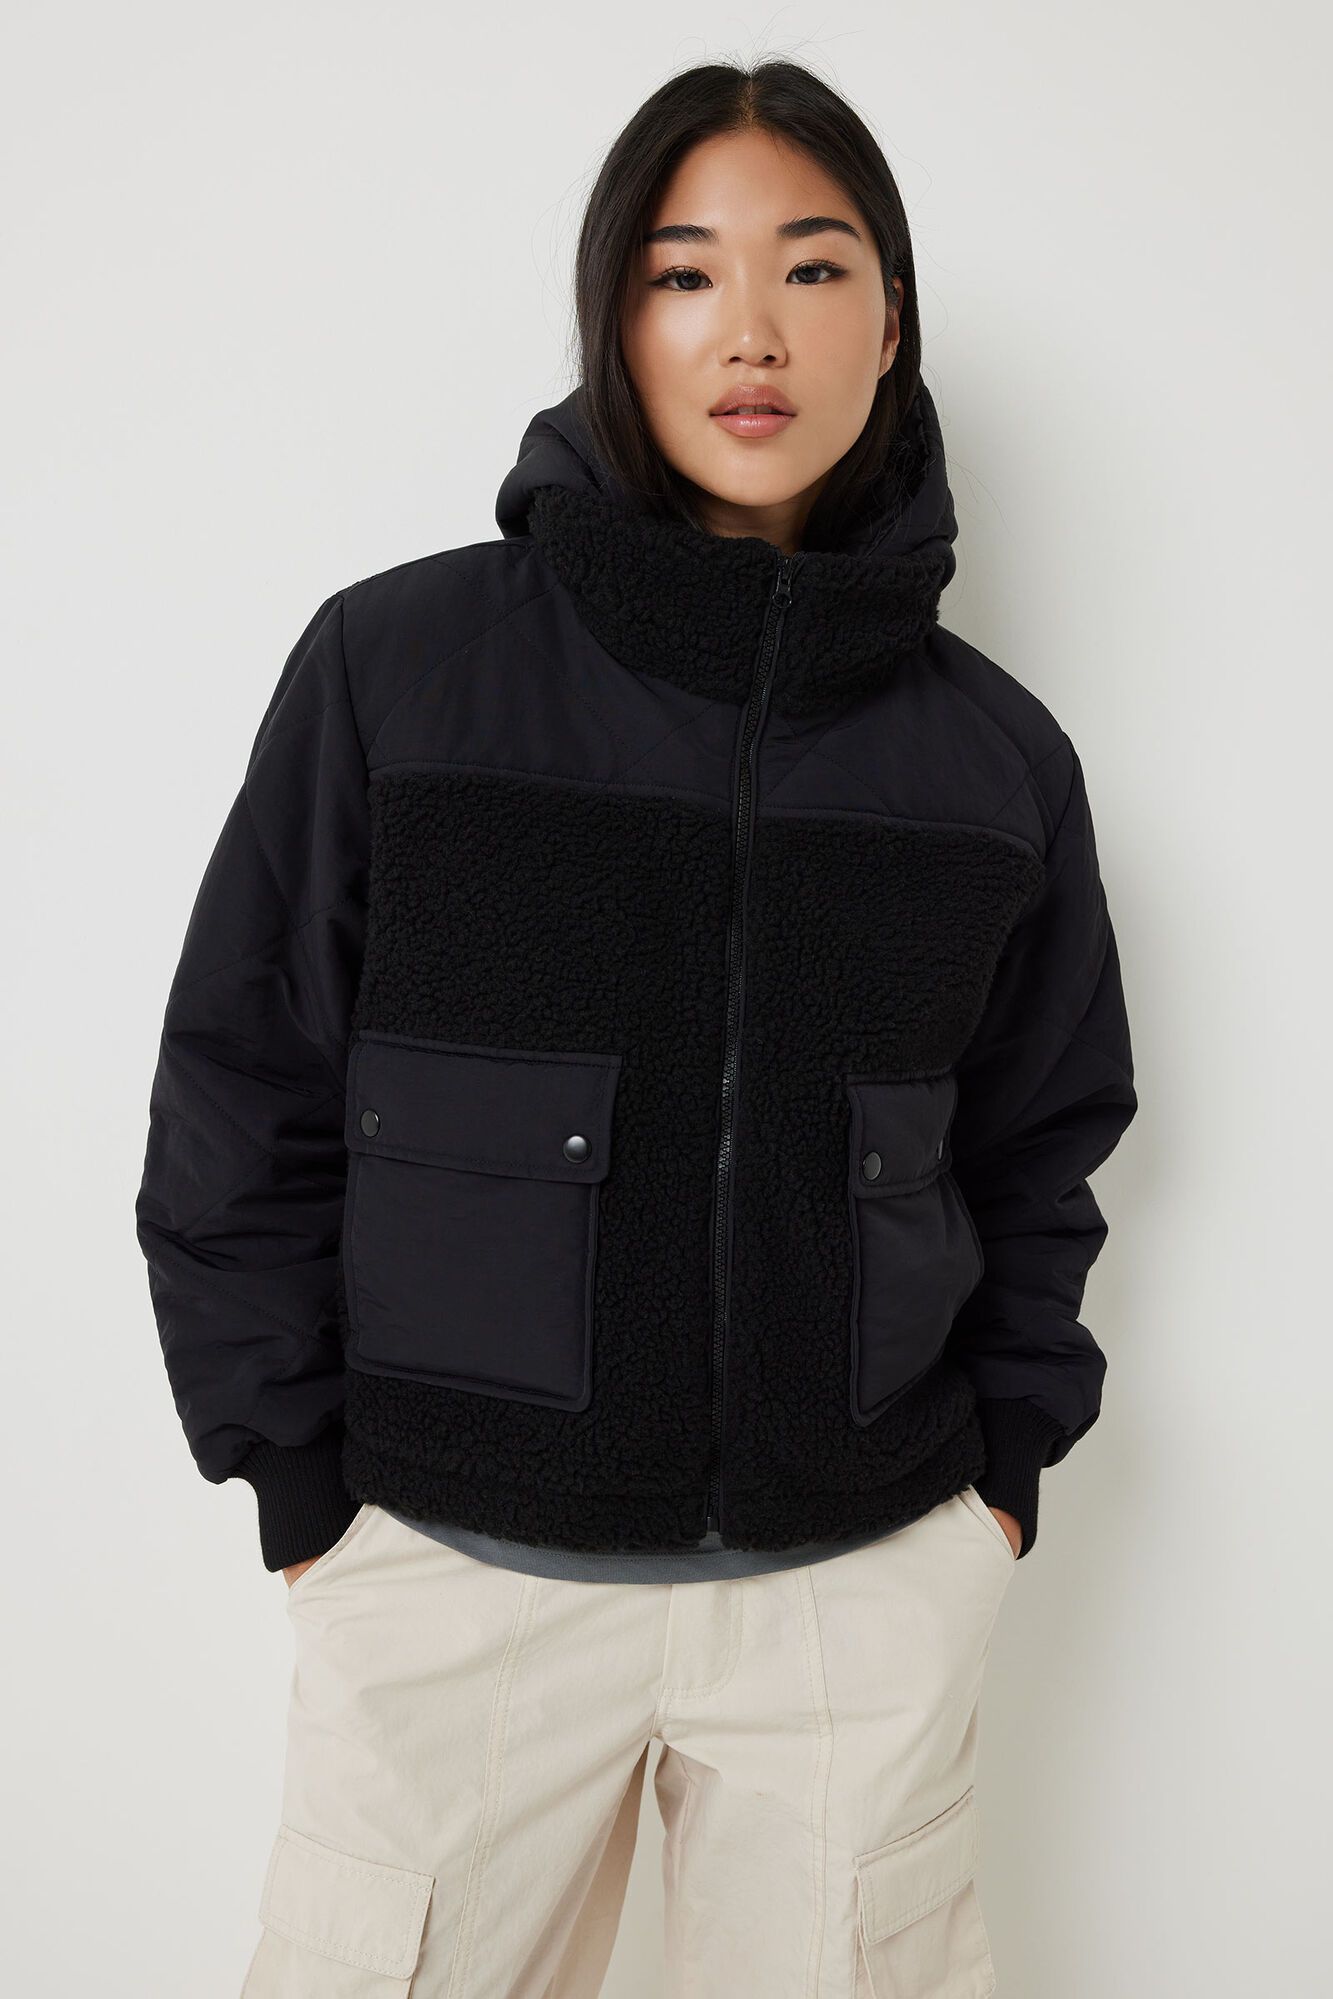 Dual-Material Jacket with Removable Hood | Ardene